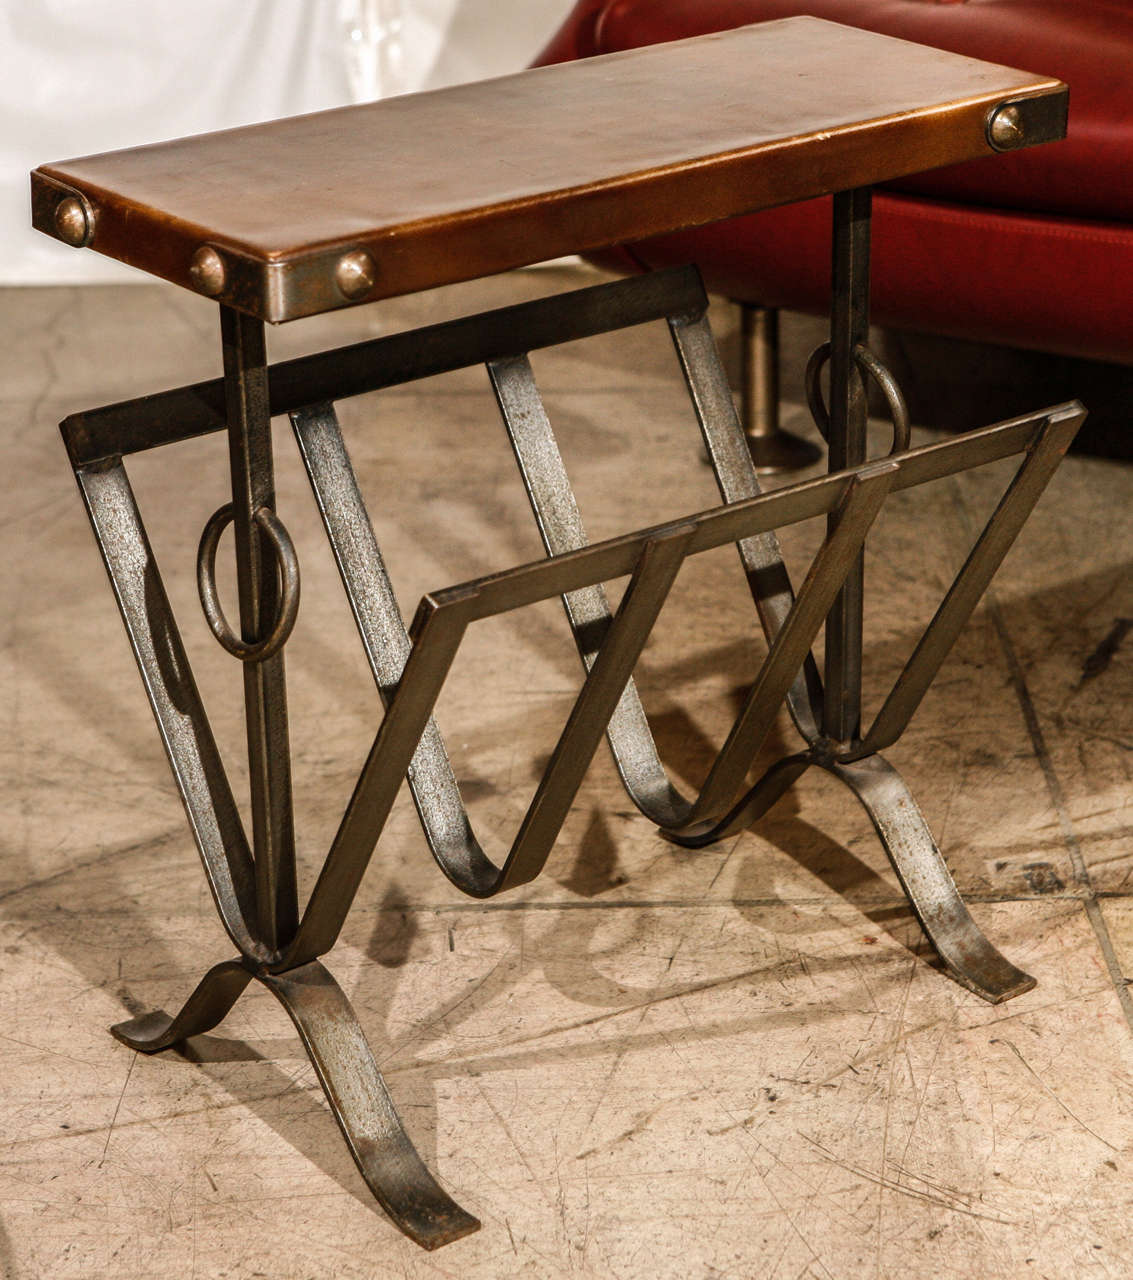 An amazing vintage magazine stand with table by Jacques Adnet. Made of wrought iron with a leather covered top.